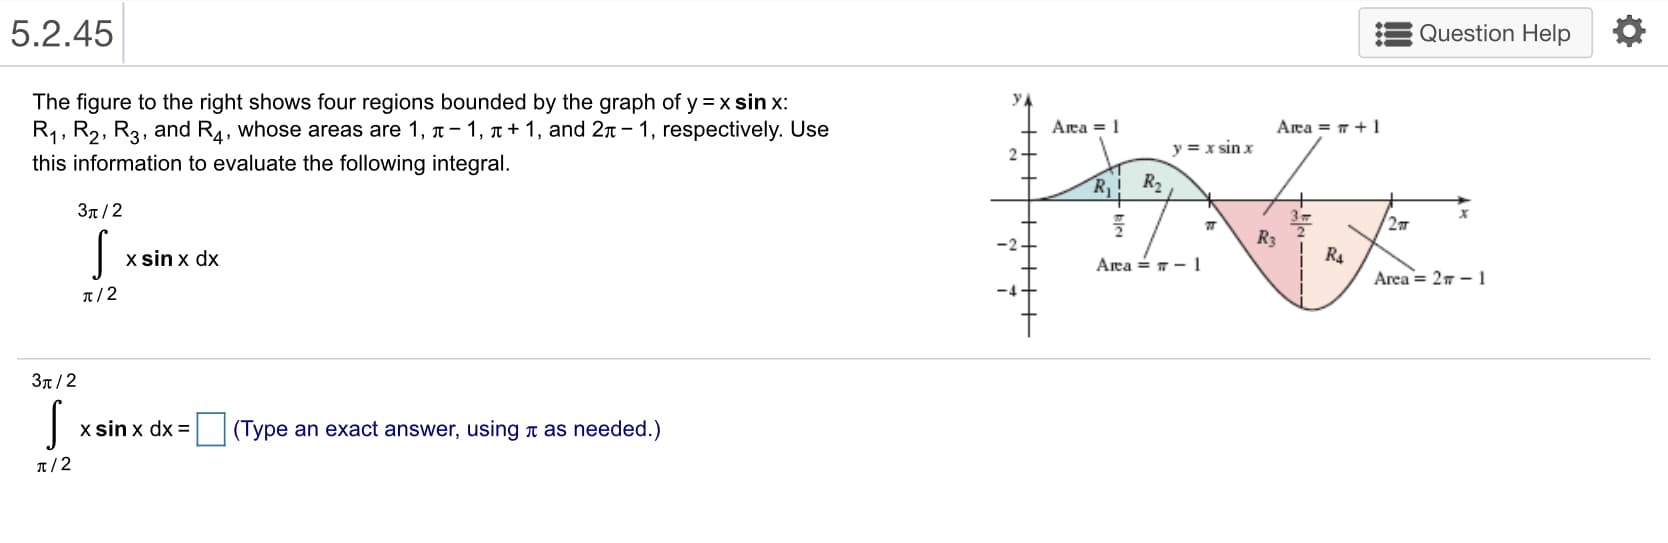 5.2.45
Question Help
The figure to the right shows four regions bounded by the graph of y=x sin x:
R1 , R2, R3, and R4, whose areas are 1, π-1, π + 1, and 2π-1, respectively. Use
this information to evaluate the following integral.
Area 1
3π / 2
Ra
x sin x dx
Area= 2π-1
π/2
3π / 2
X Sin X dX-|
| ( lype an exact answer, using π as needed.)
兀
